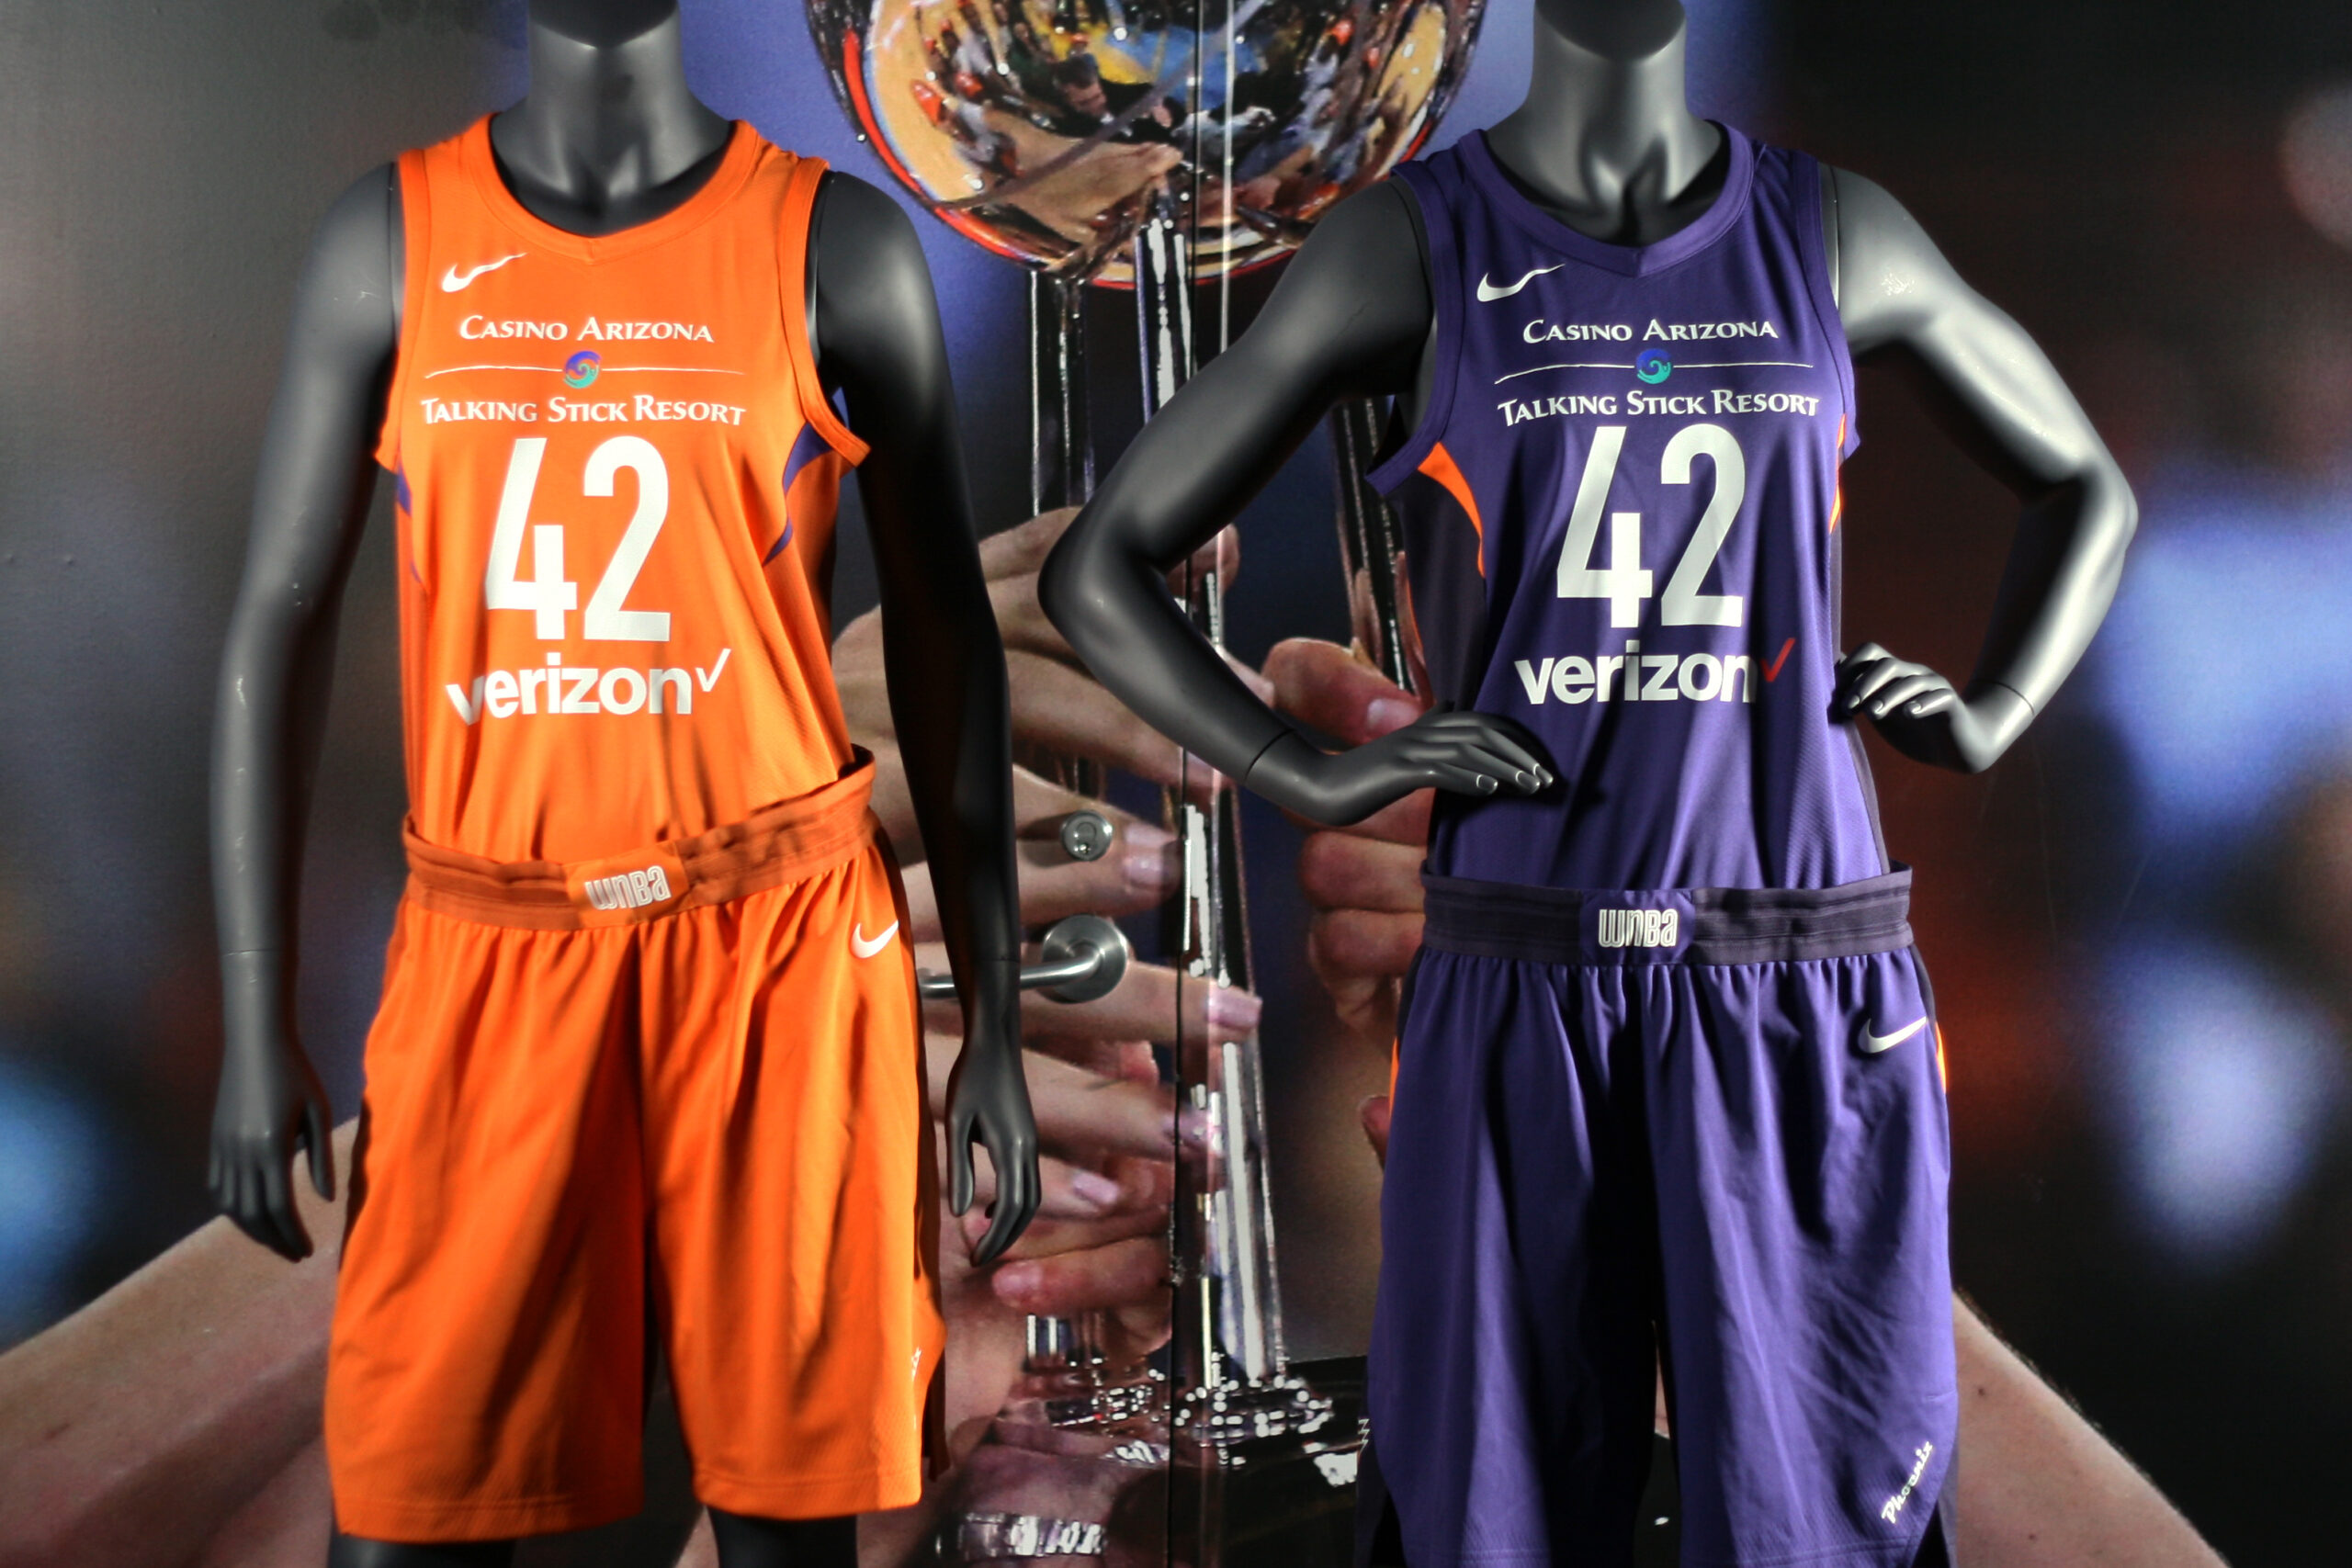 Photo Gallery: 2019 WNBA Uniforms from Nike - The UConn Blog